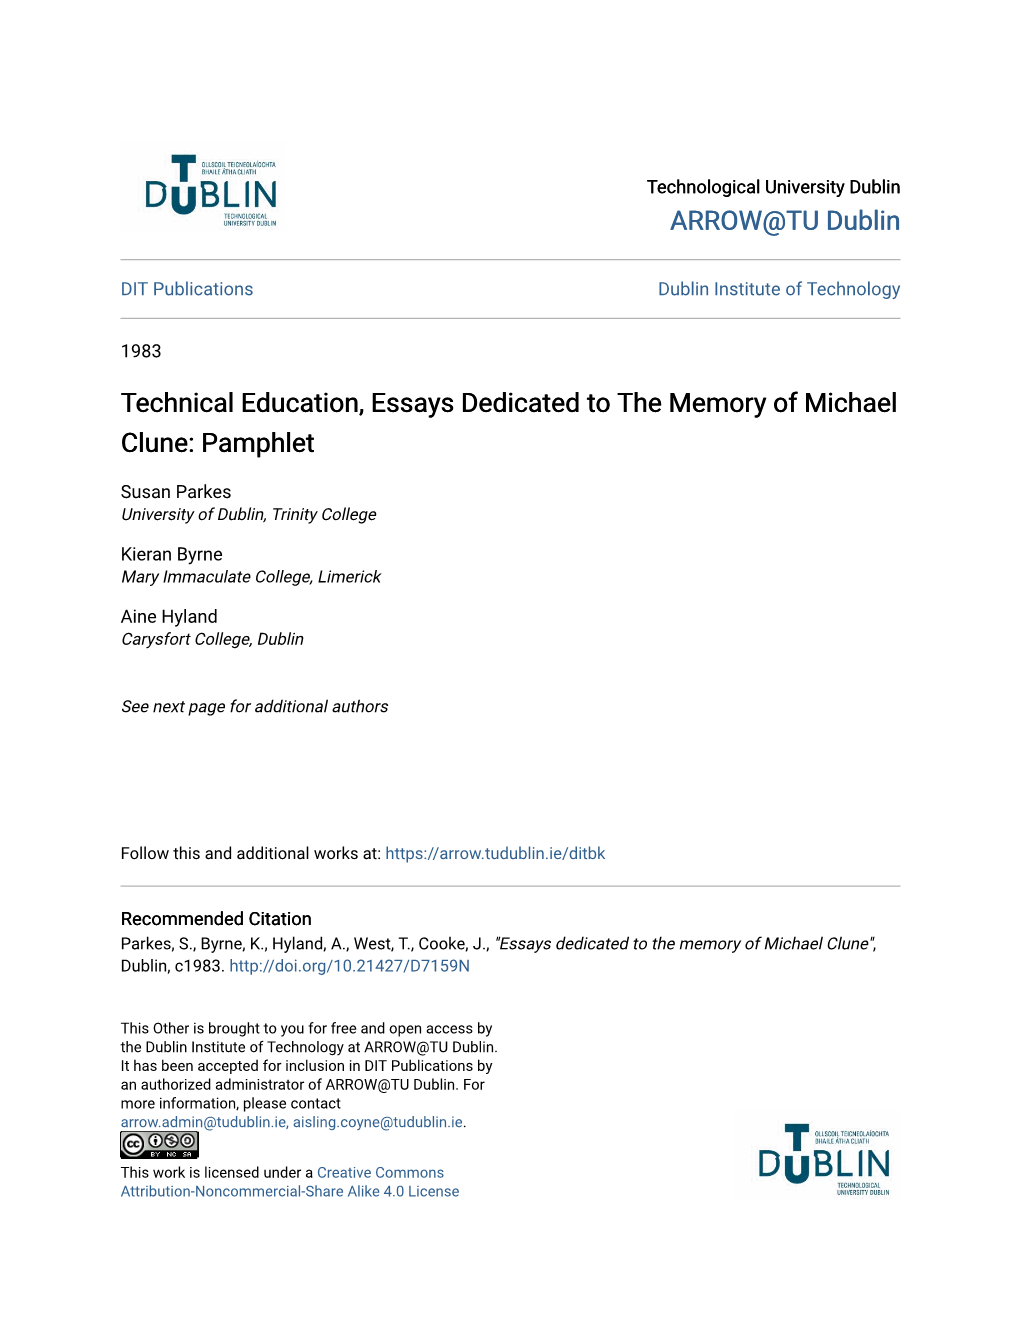 Technical Education, Essays Dedicated to the Memory of Michael Clune: Pamphlet